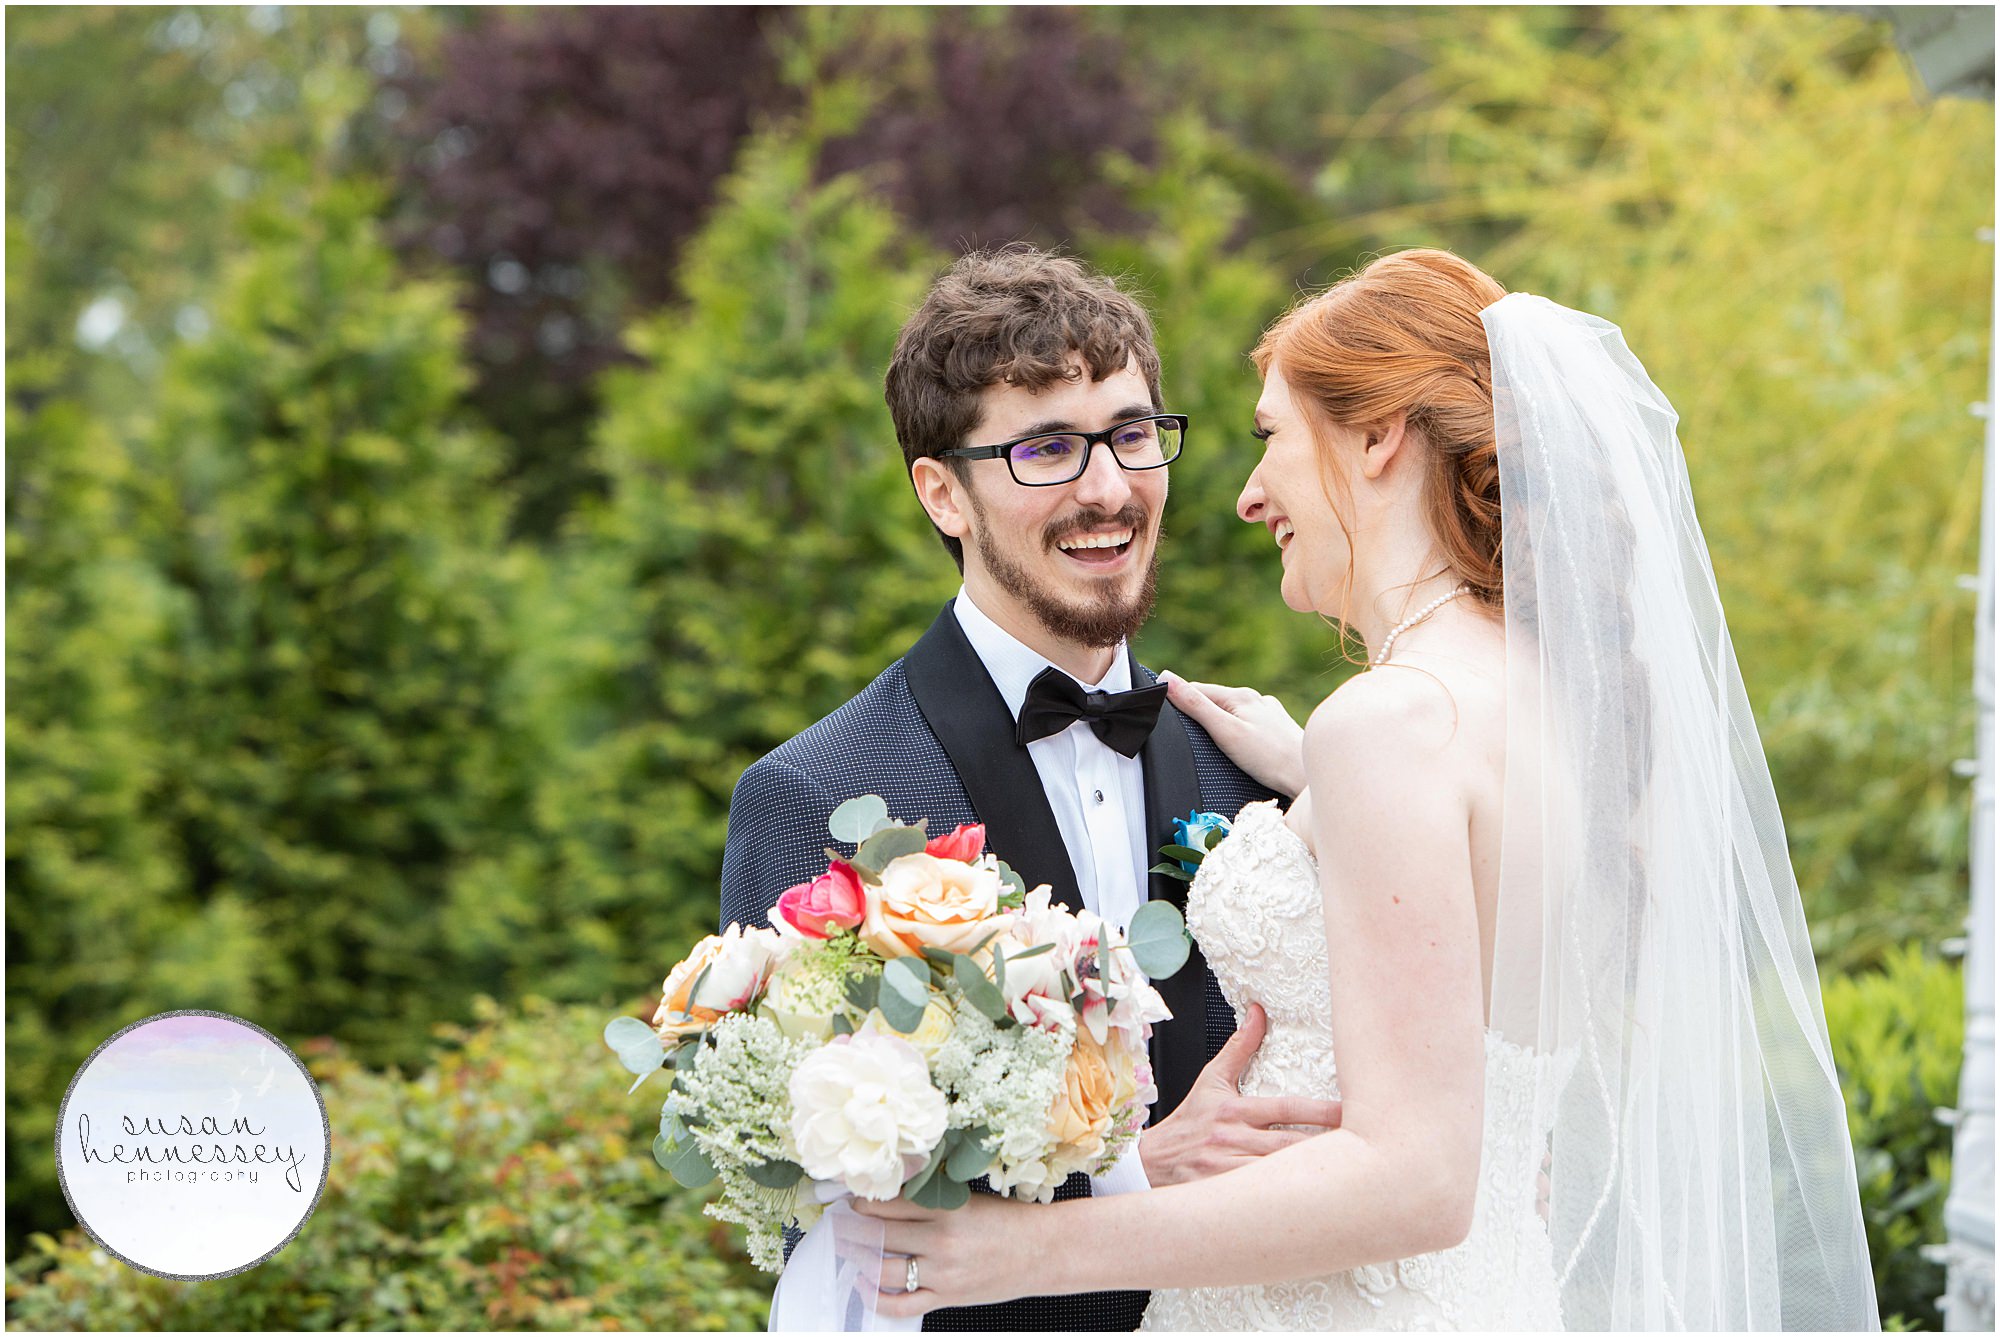 A bride and groom laugh on their wedding day